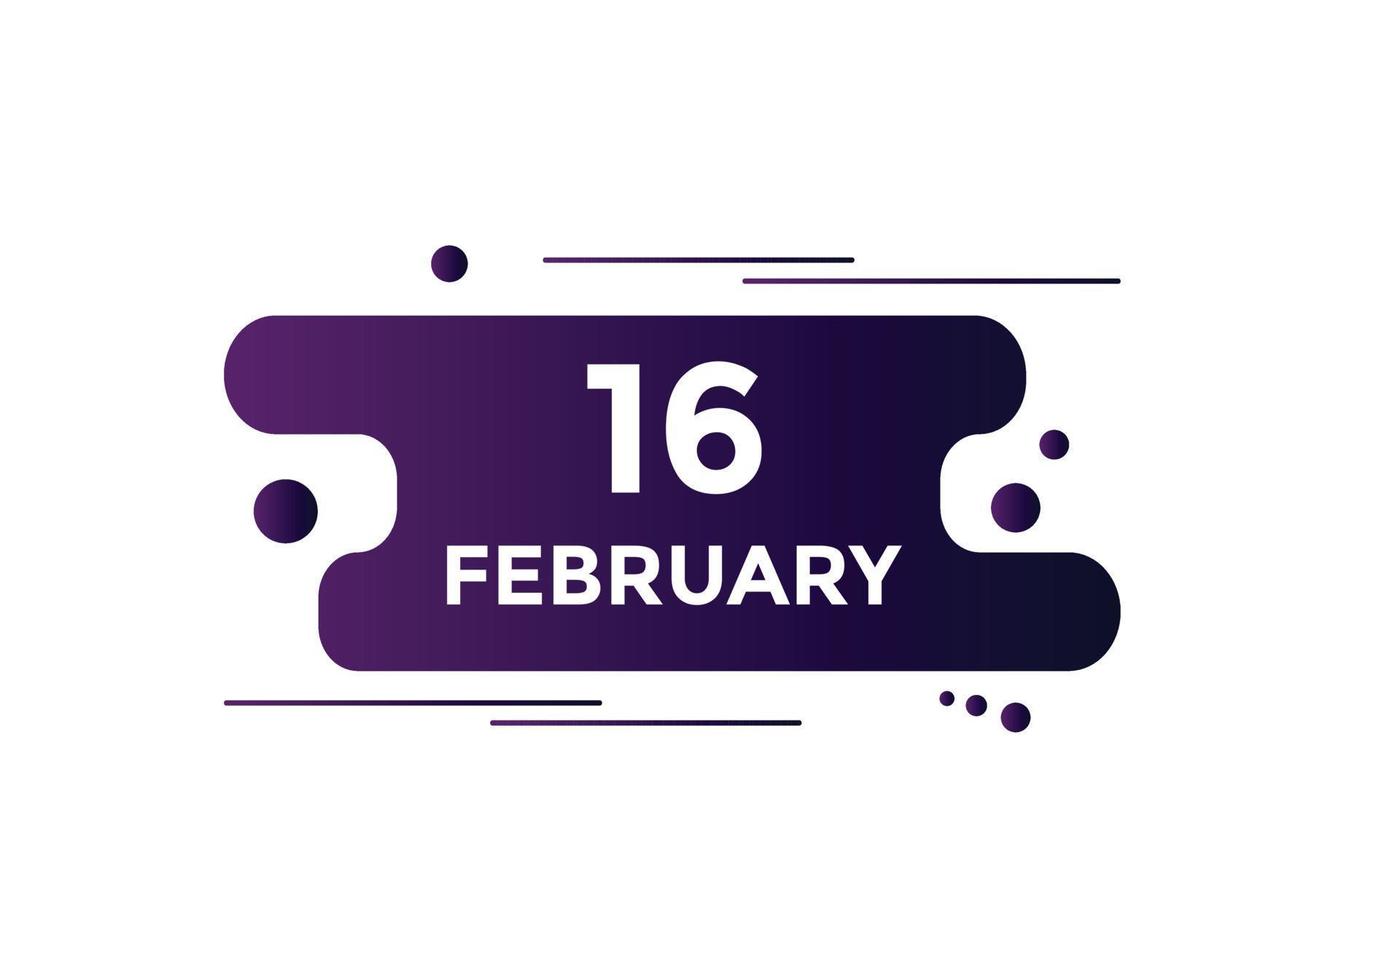 february 16 calendar reminder. 16th february daily calendar icon template. Calendar 16th february icon Design template. Vector illustration